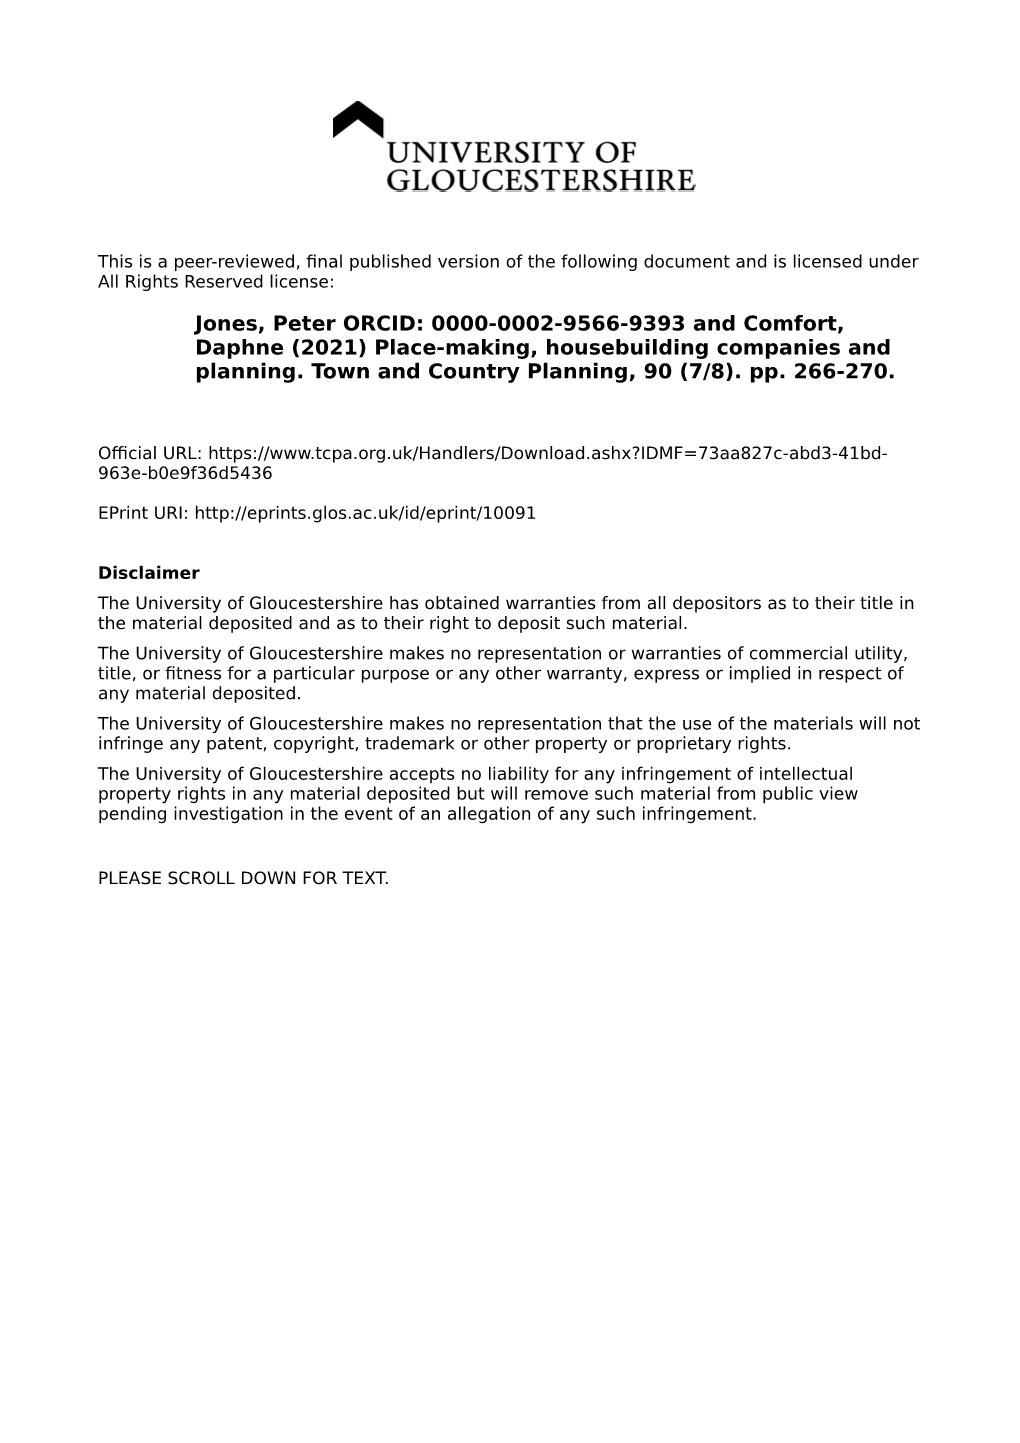 Jones, Peter ORCID: 0000-0002-9566-9393 and Comfort, Daphne (2021) Place-Making, Housebuilding Companies and Planning